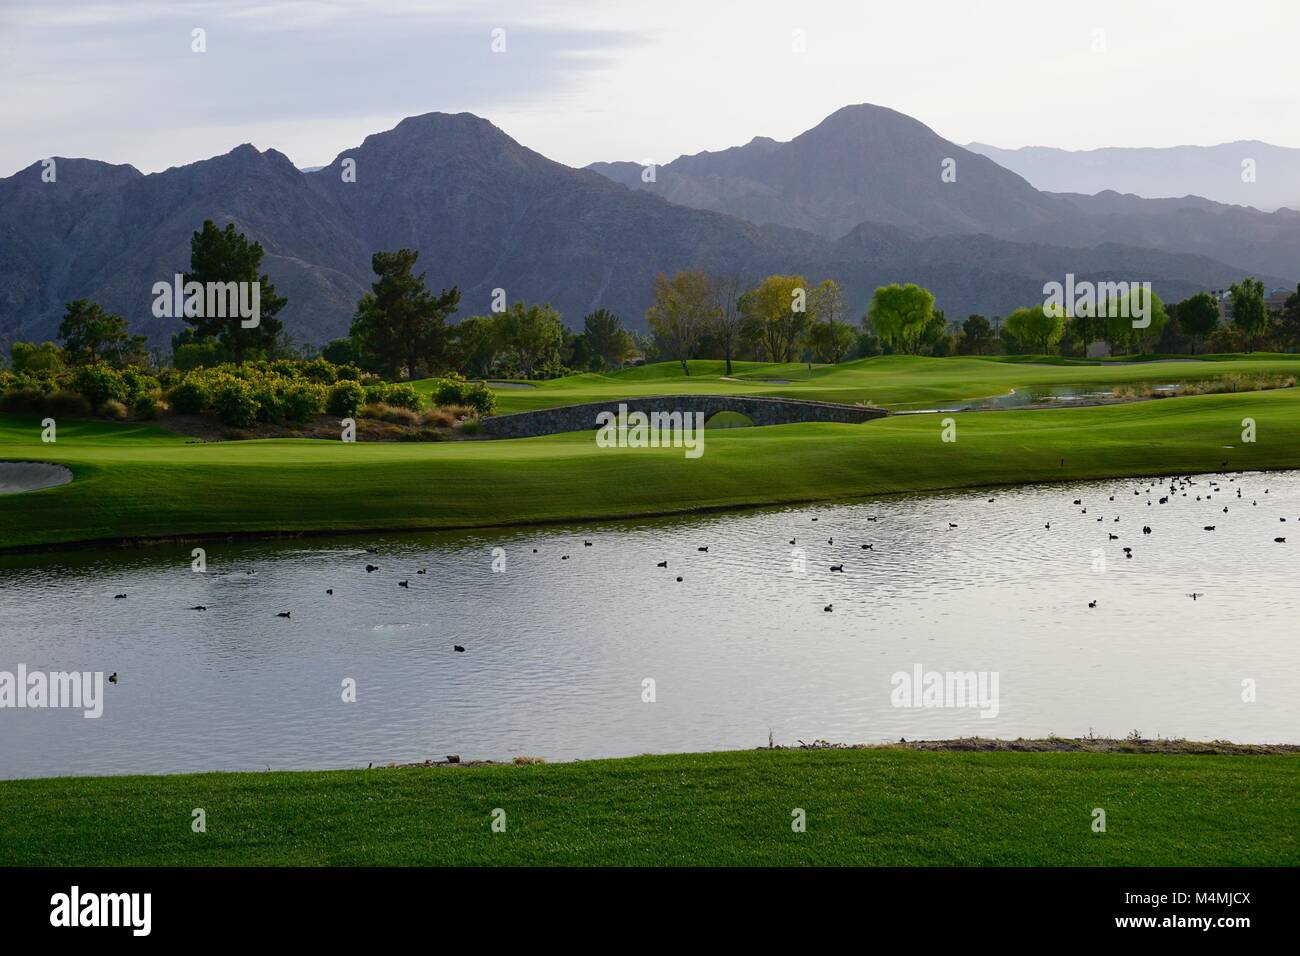 Golf course landscape including bridge and water in front of mountain background Stock Photo